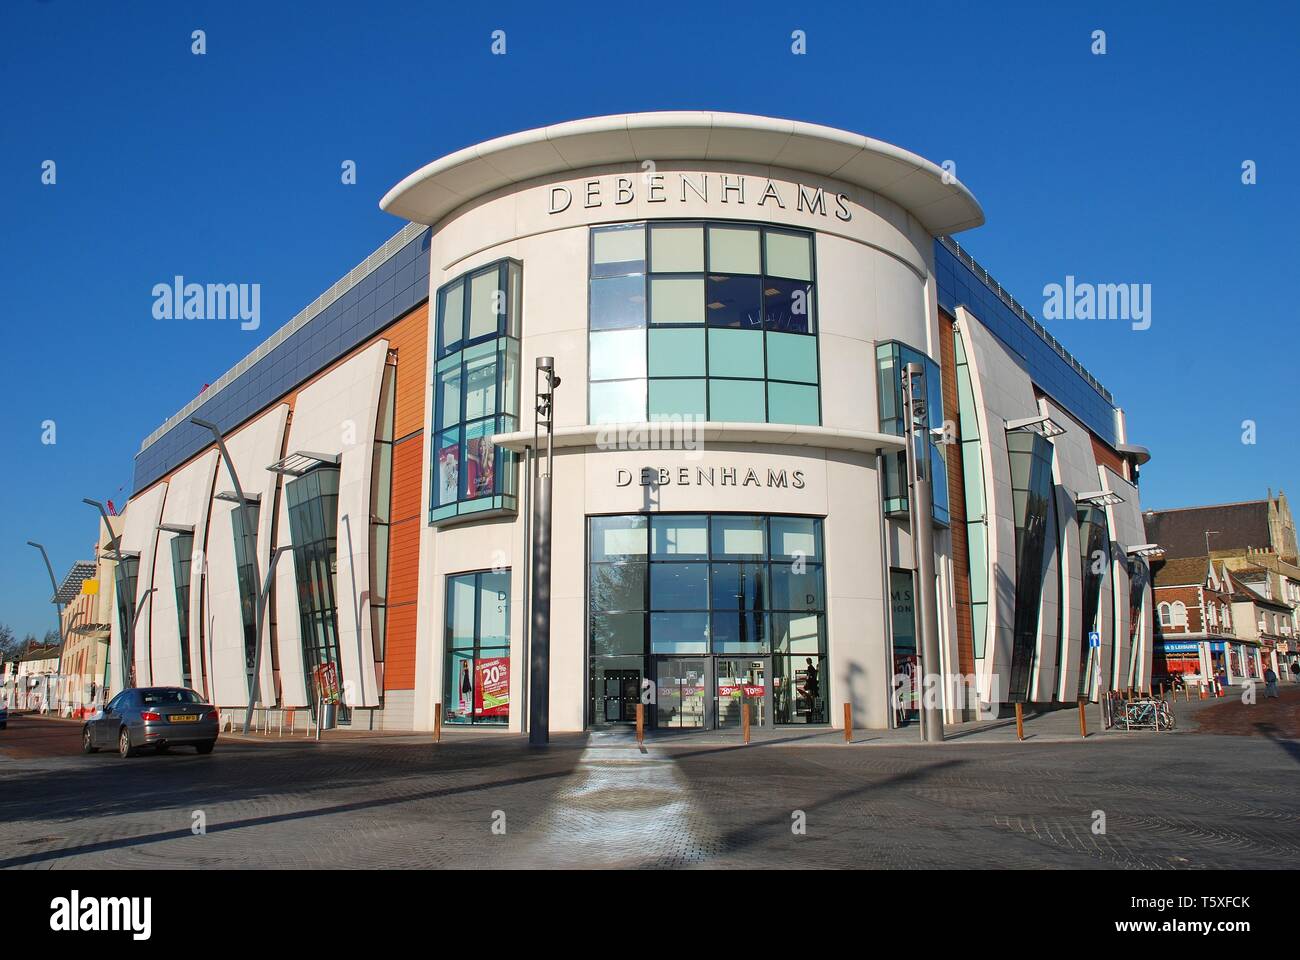 Debenhams department store in Ashford, Kent, UK on December 8, 2008. Opened in March 2008, it is one of 22 Debenhams stores set to close in 2020. Stock Photo